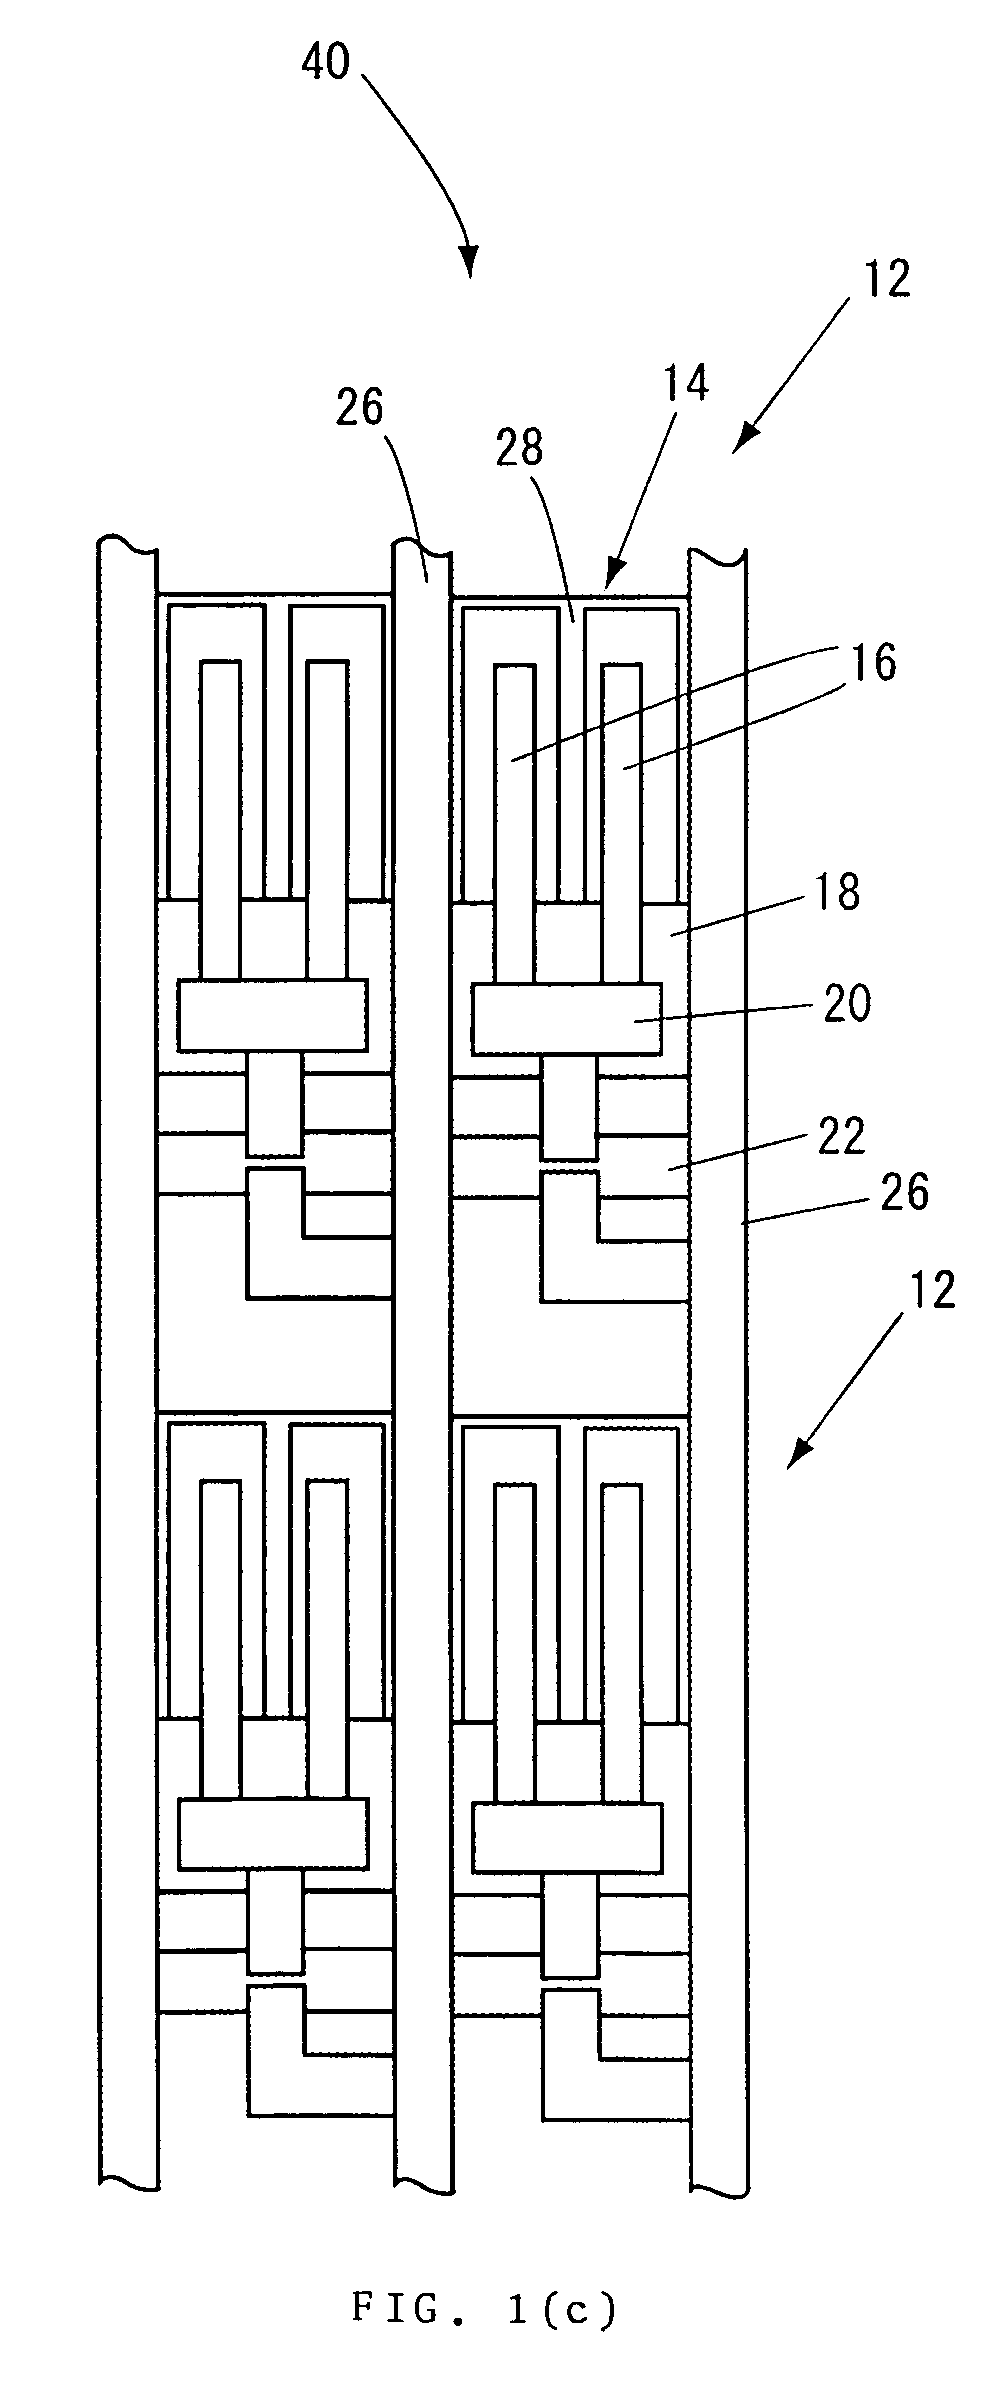 IPS LCD and repair method of cutting defective pixel electrode by forming window in capacitor storage circuit